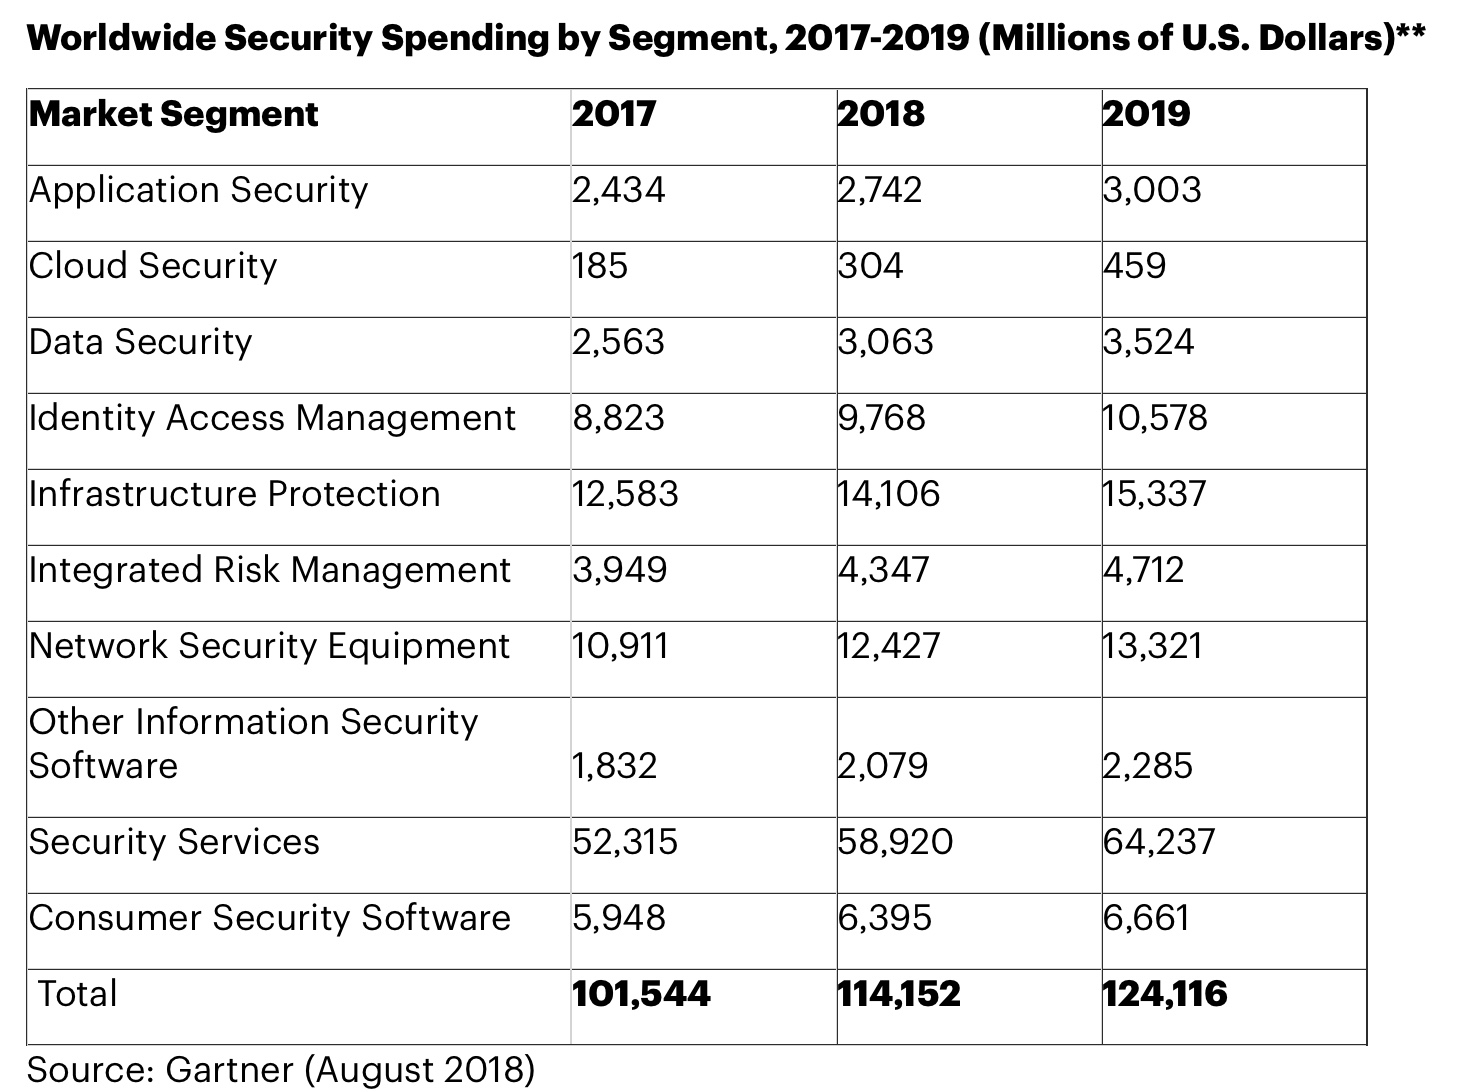 Worldwide info security spending forecast to exceed $124 billions n 2019